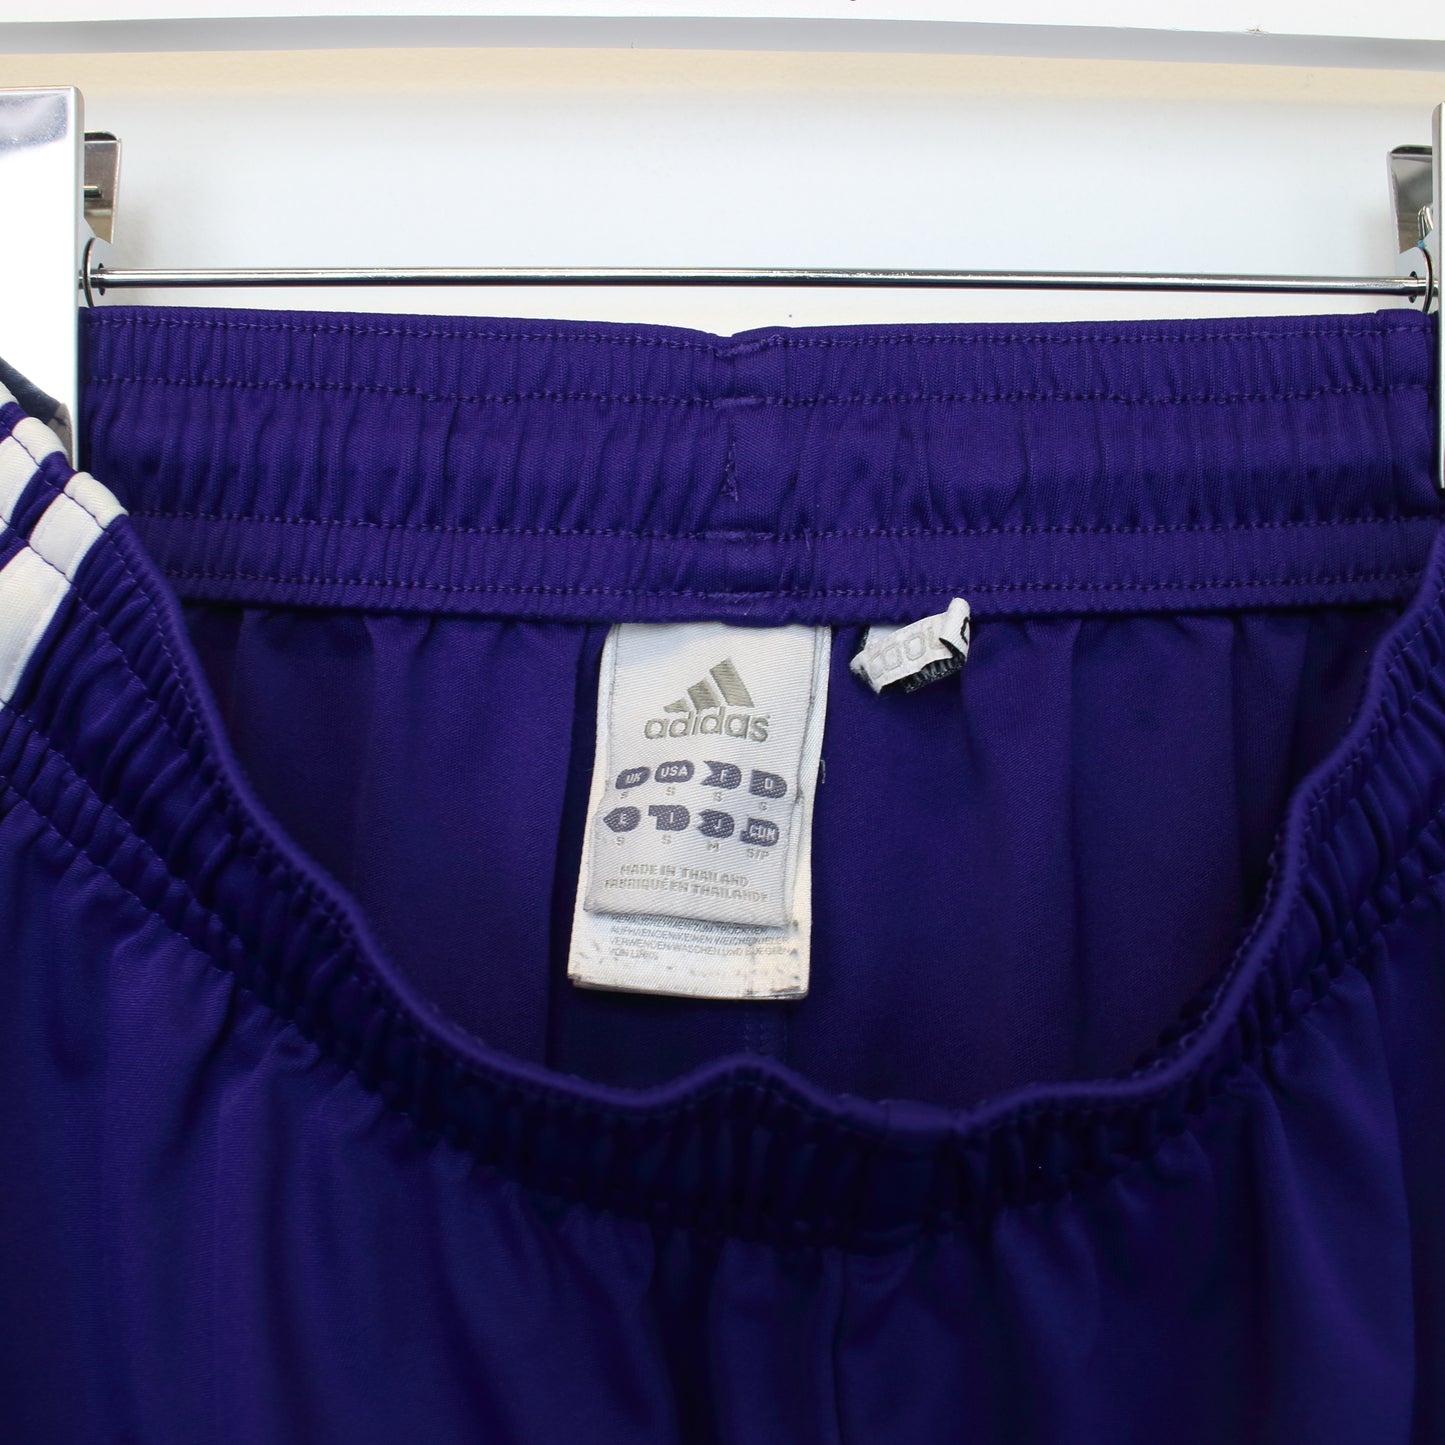 Vintage Adidas shorts in purple. Best fits S